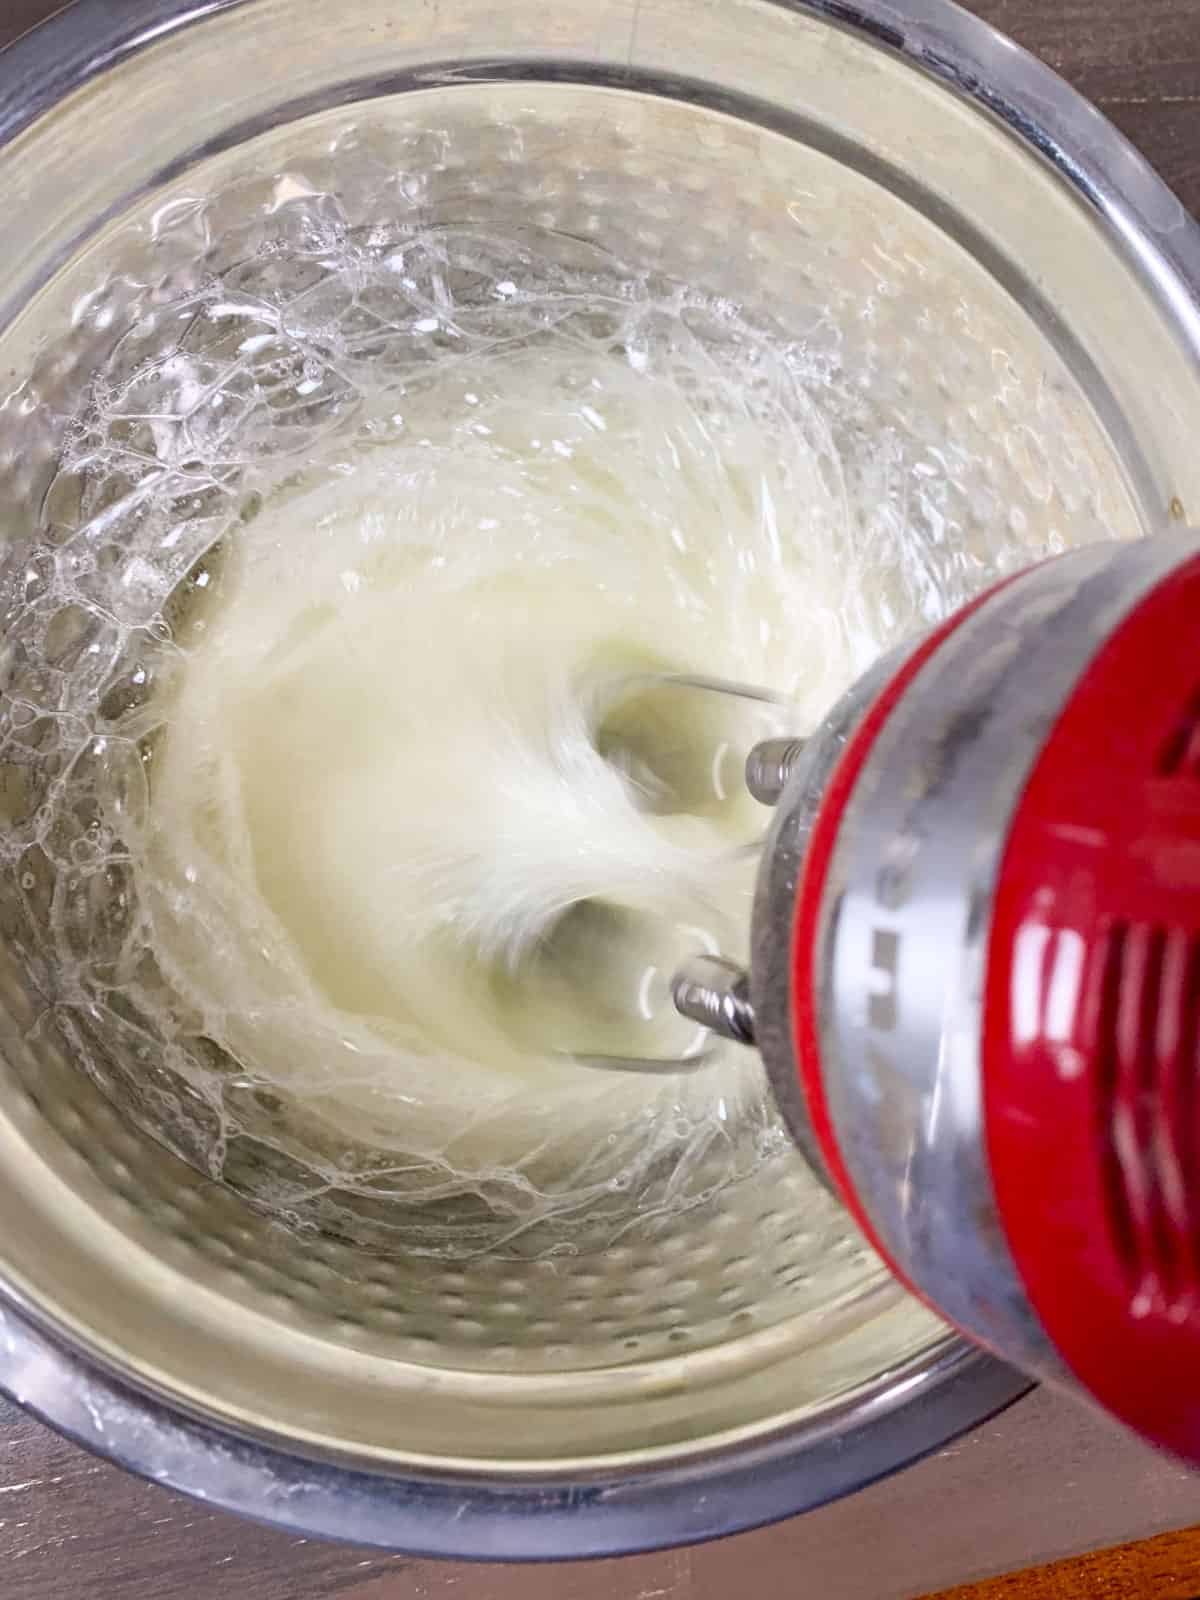 beating the egg whites in a clean bowl for old fashioned sour cream pound cake.